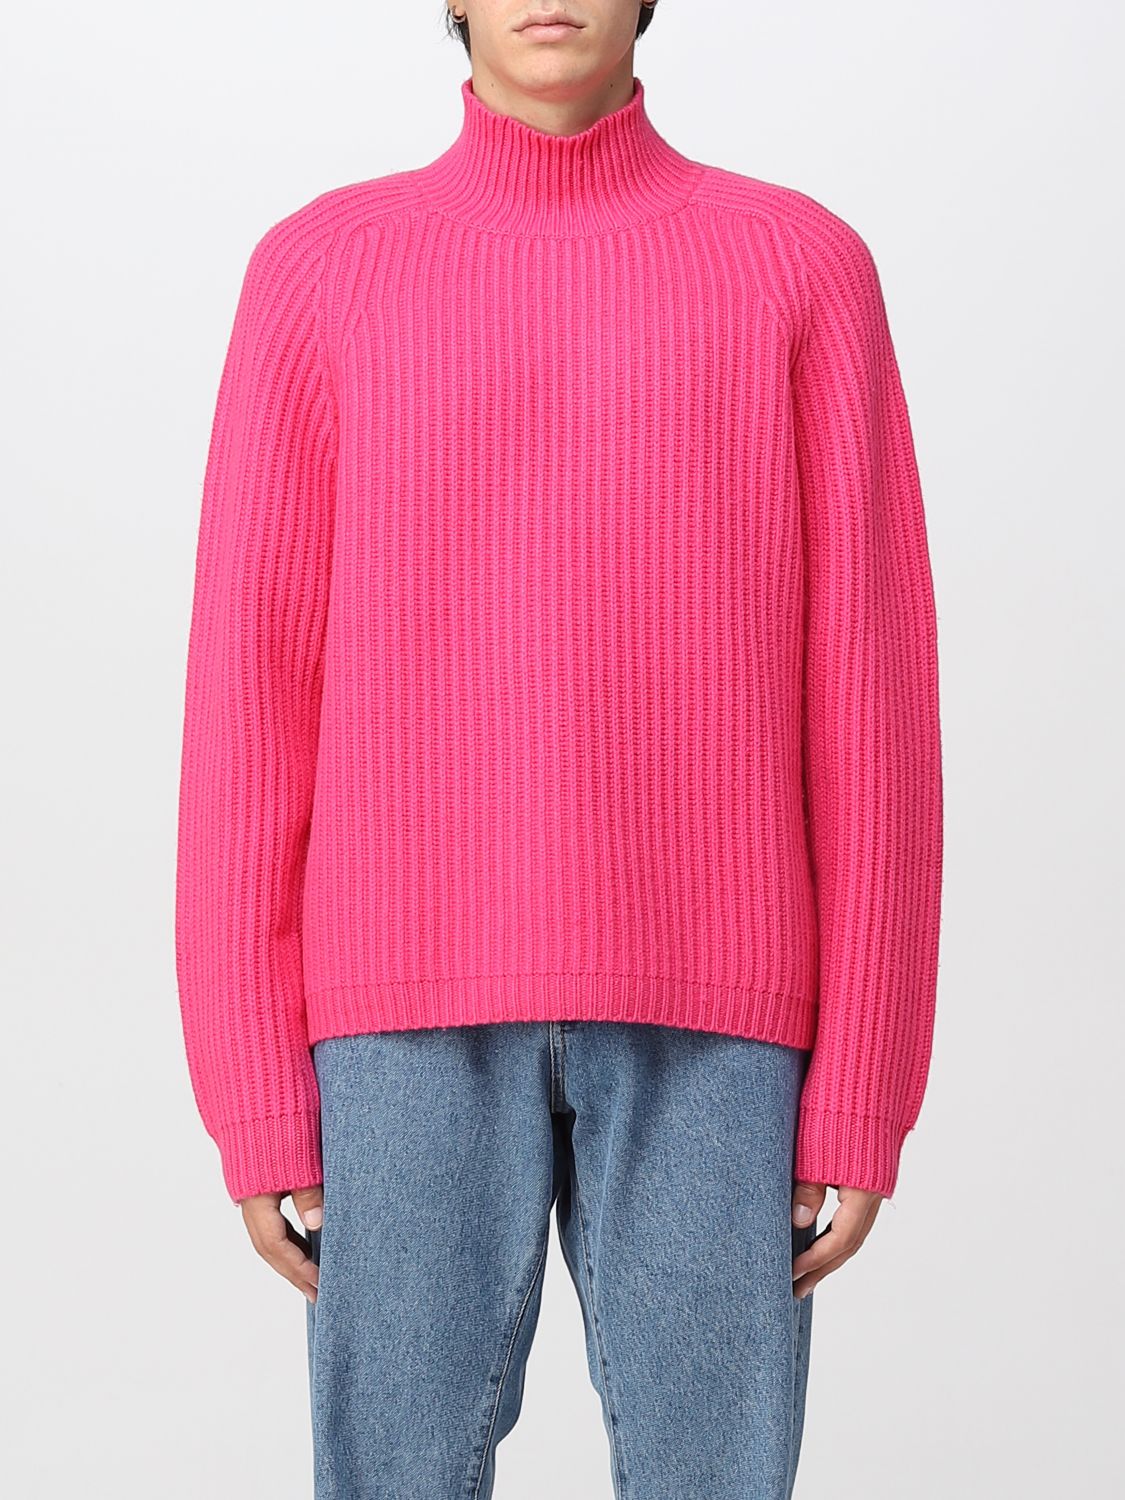 JW ANDERSON: sweater for man - Fuchsia | Jw Anderson sweater ...